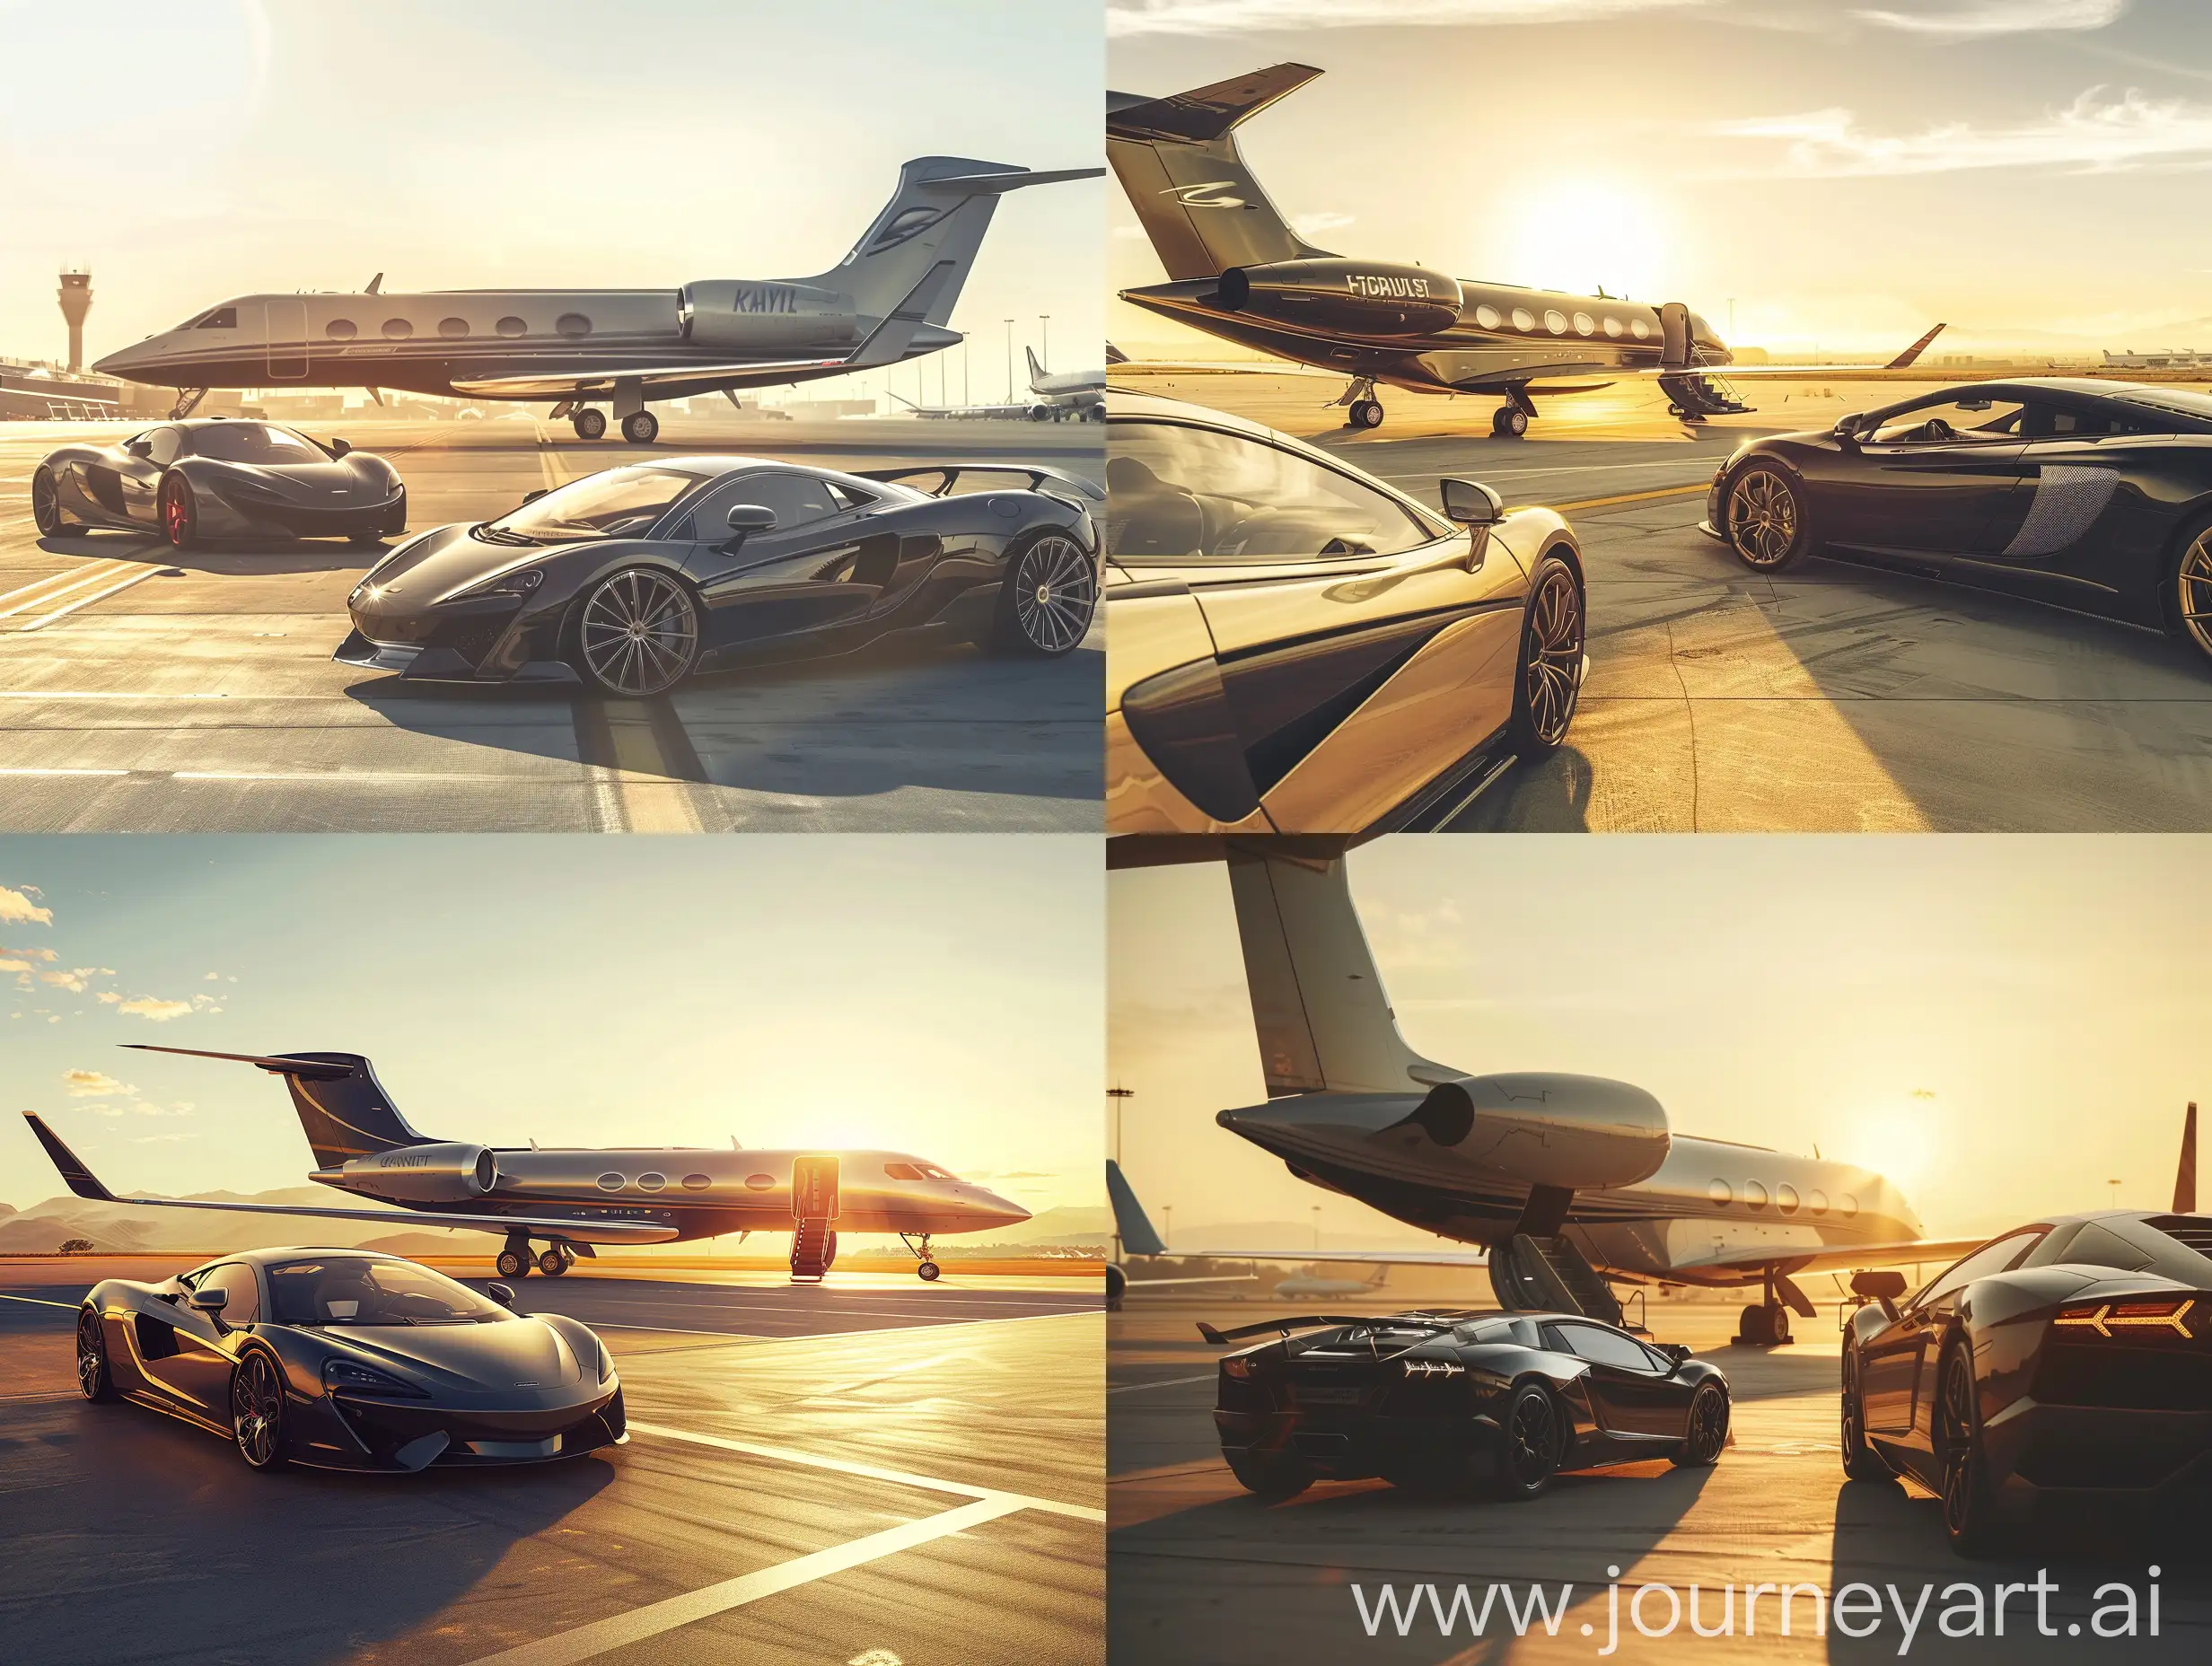 Generate a luxurious image showcasing a sleek supercar and a private jet parked side by side on a sunlit landing strip, epitomizing the epitome of business class service at the airport. Visualize the seamless business class transfer experience as passengers step out of the supercar and board the waiting private jet. This image exudes elegance and sophistication, capturing the essence of elite travel and seamless airport shuttle services.